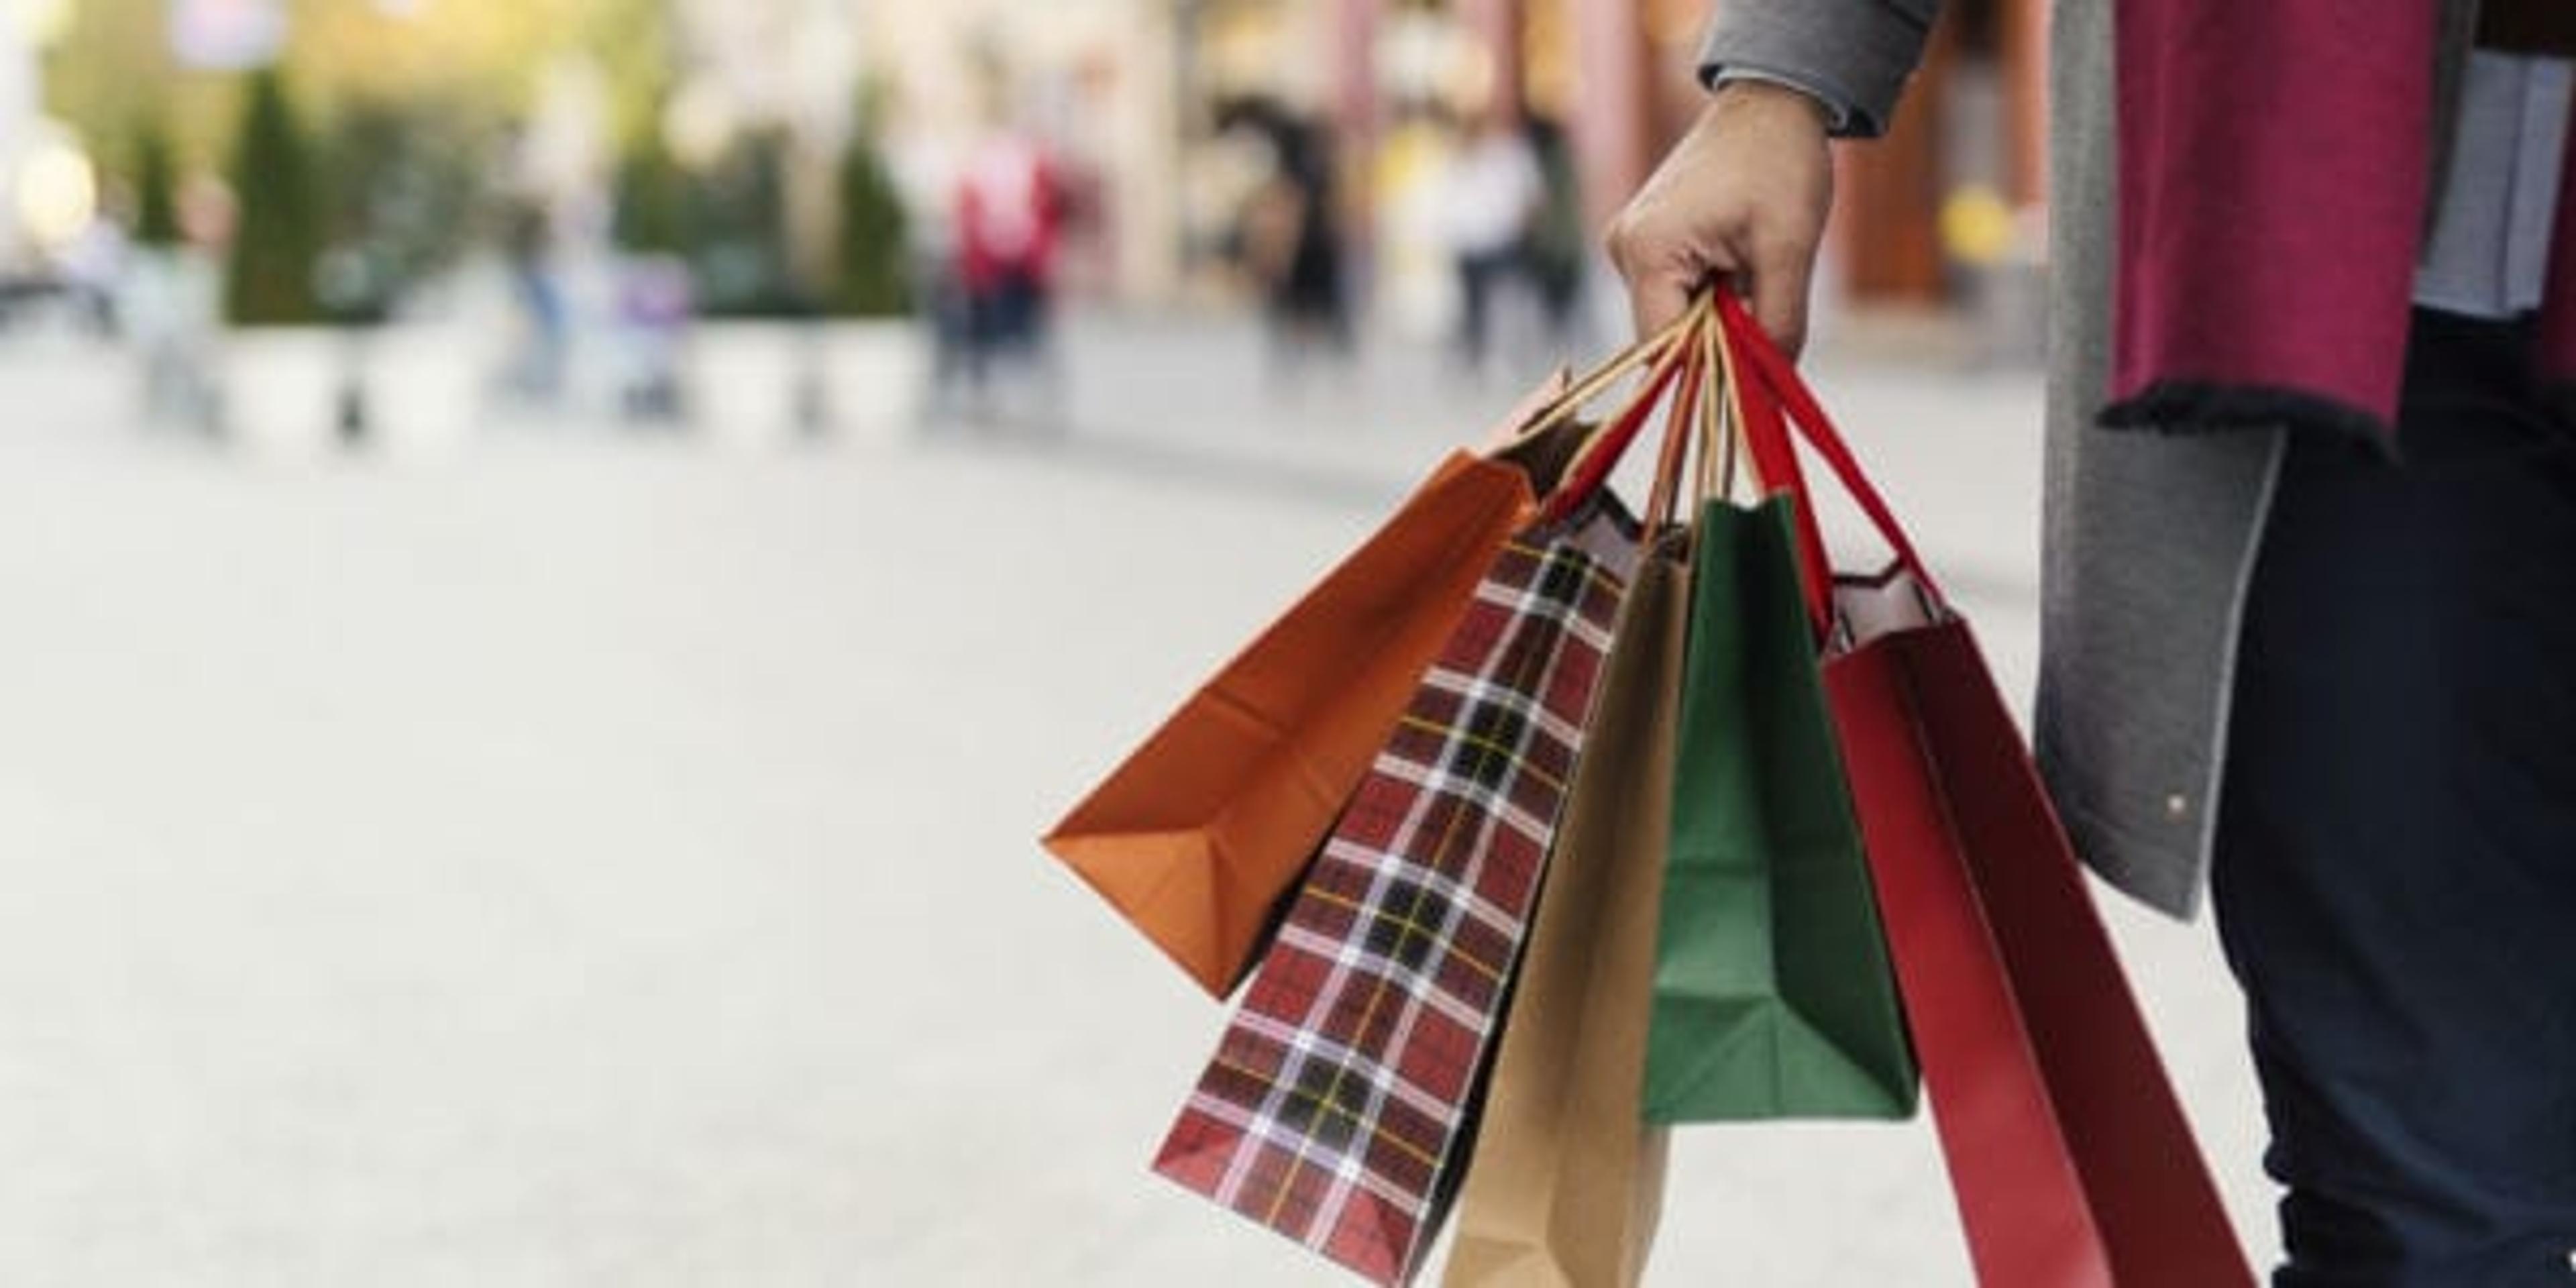 Image of man holding shopping bags with presents on the street.